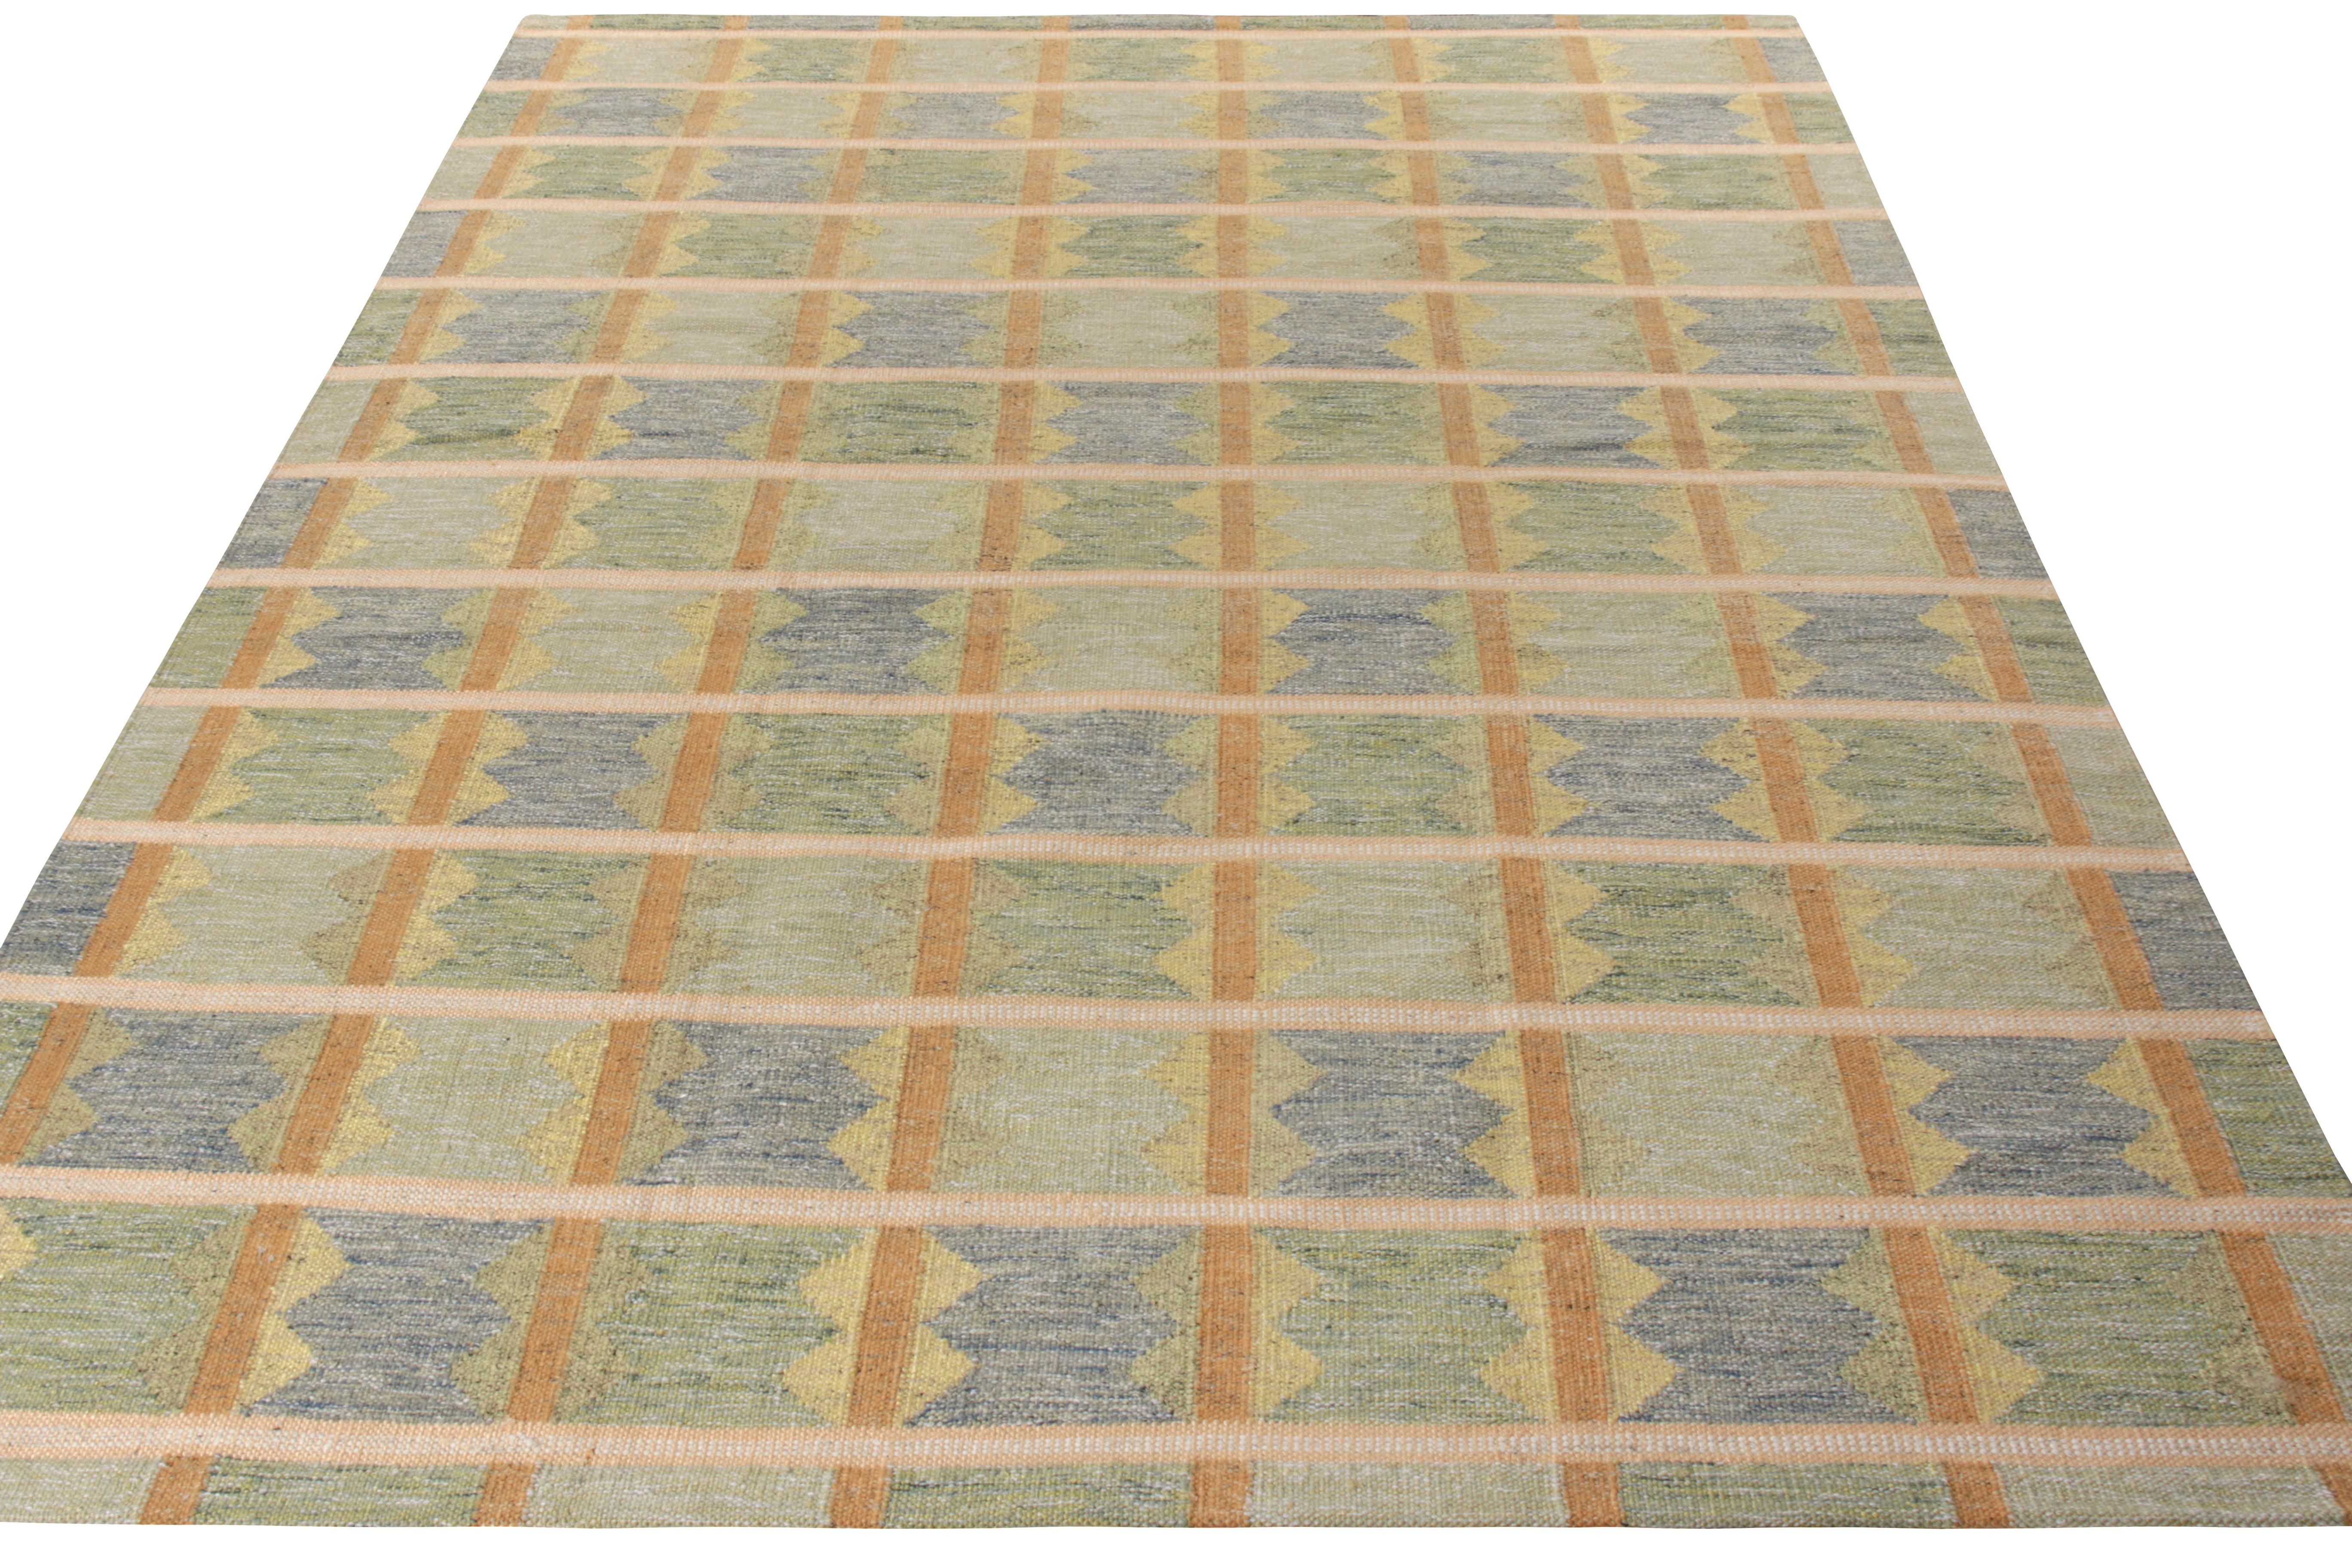 Carrying the intrinsic strength and buckle resistant traits of Rug & Kilim’s coveted Scandinavian Cllection, this 9x12 custom kilim reflects fine craftsmanship in a modern frame. Exhibiting fine mid-century Swedish sensibilities, the flatweave